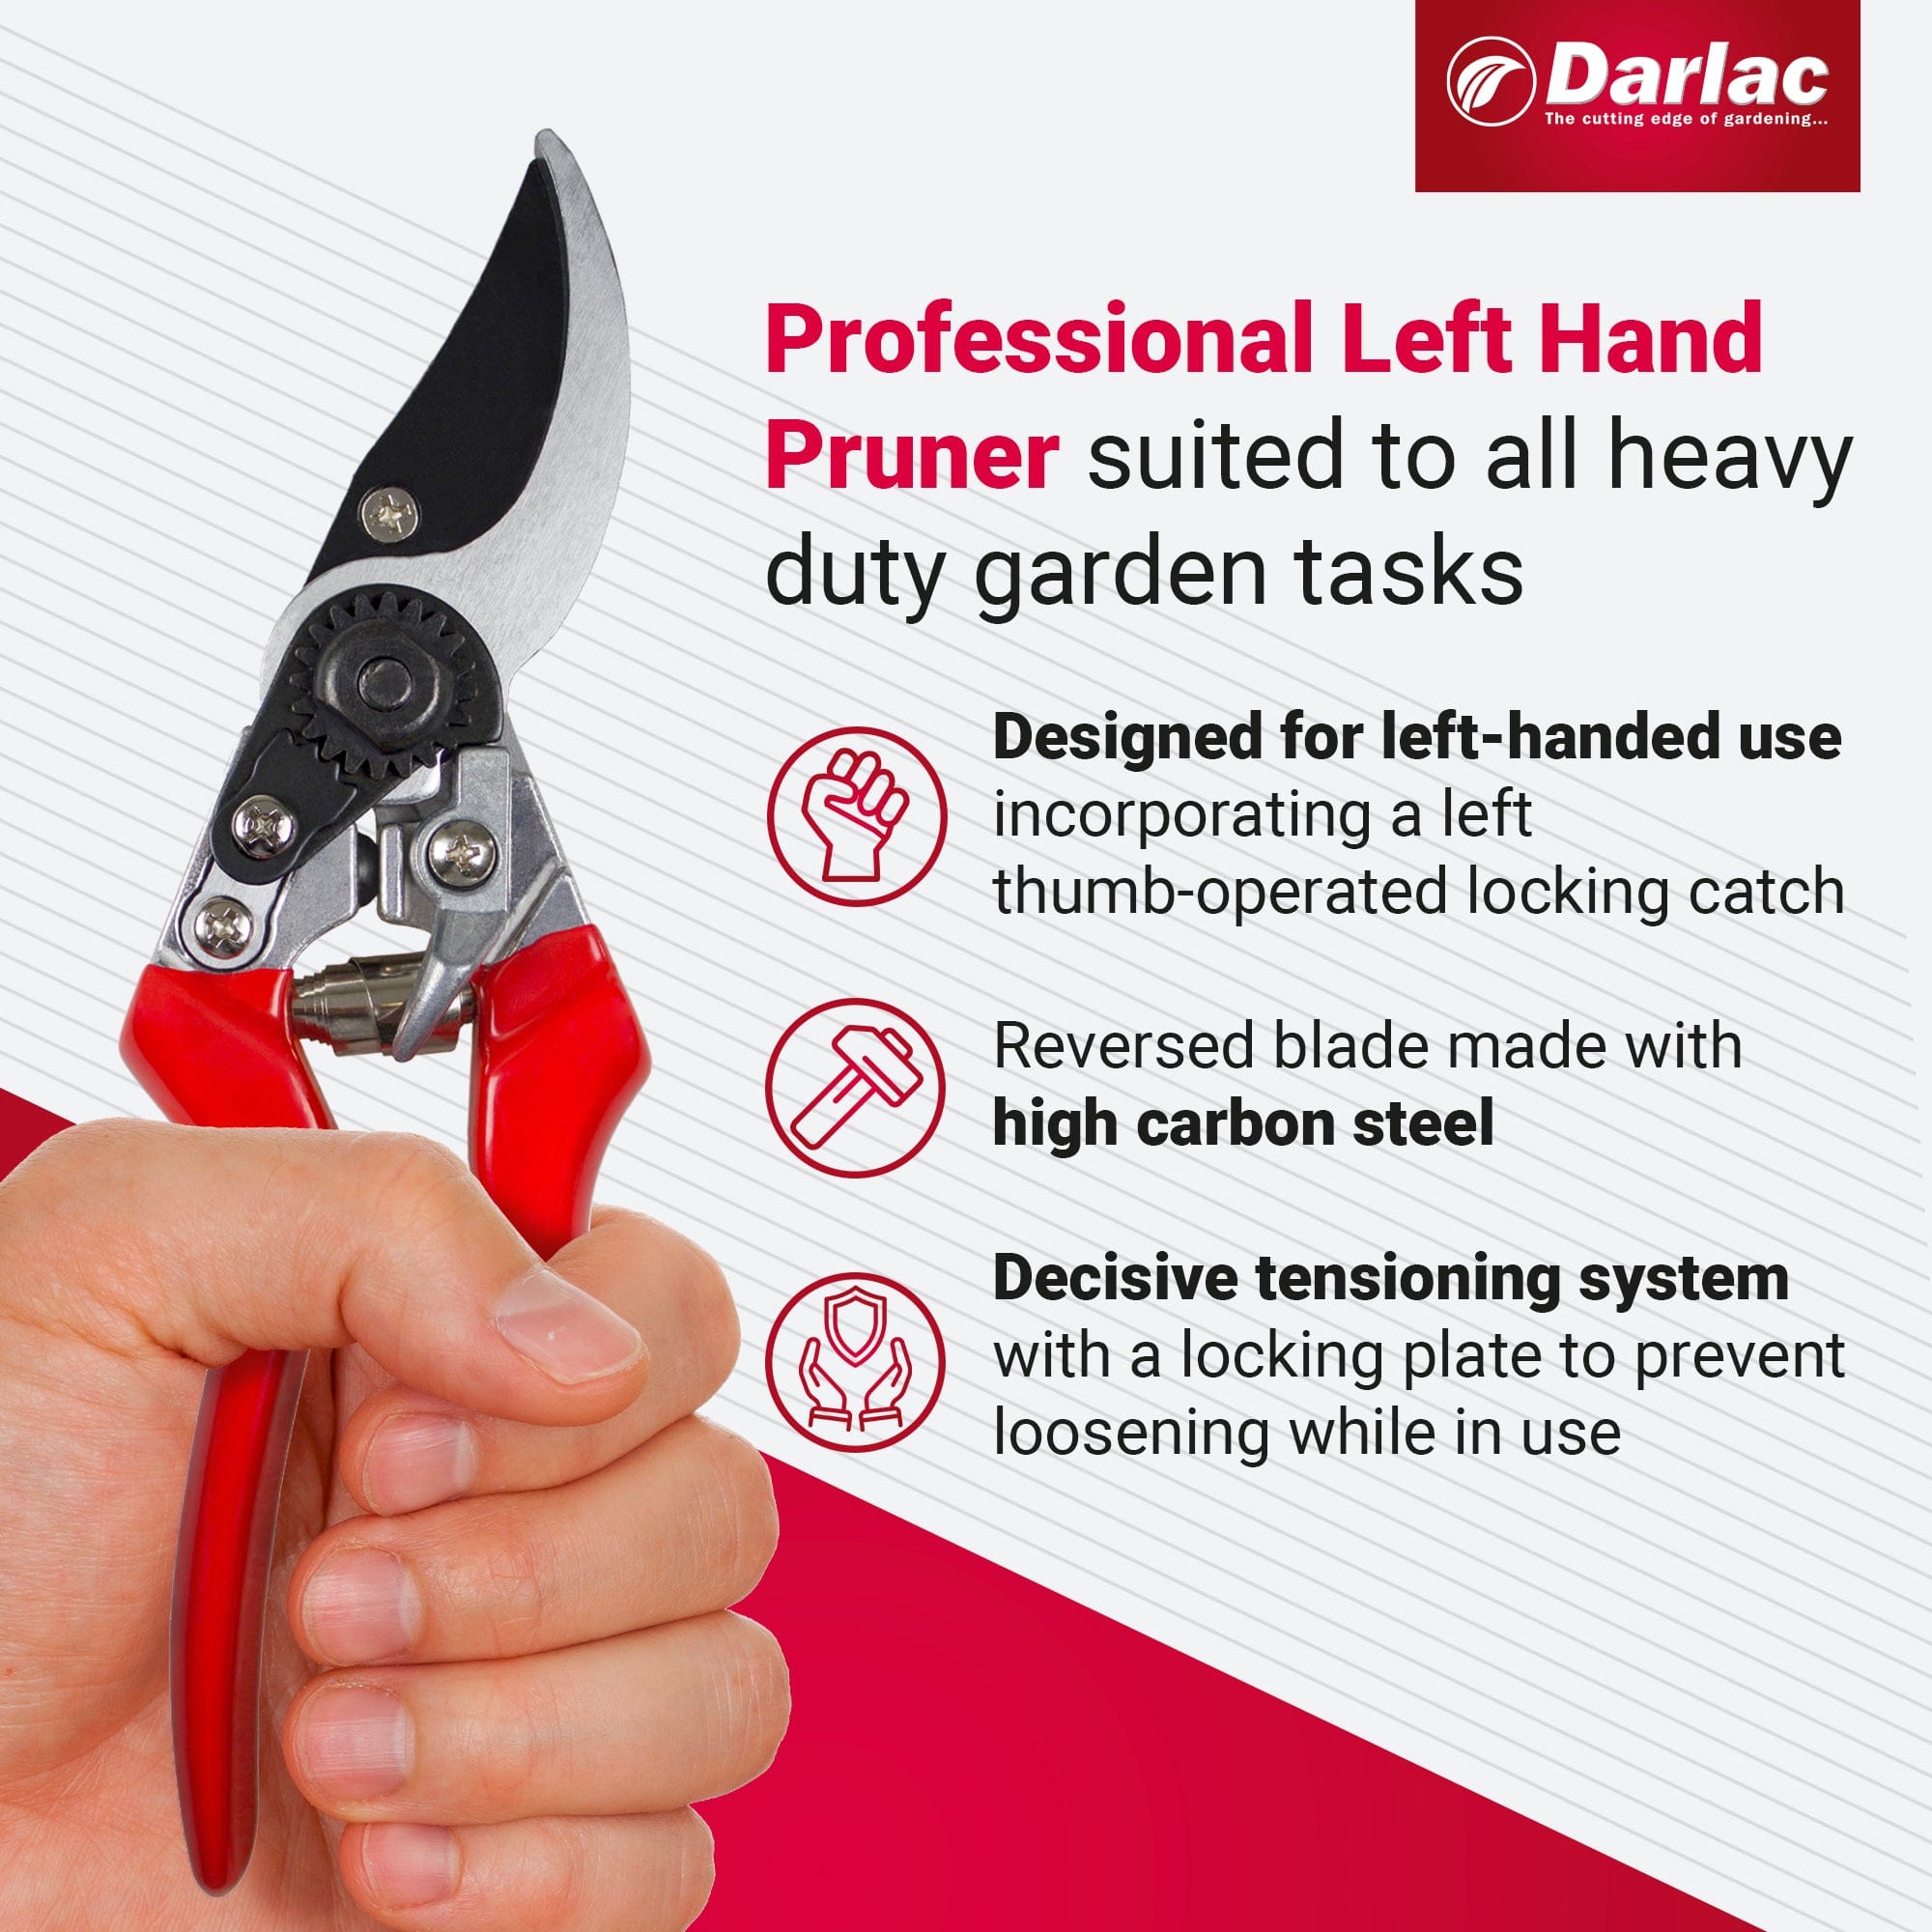 dt-brown HARDWARE Darlac Professional Left Hand Secateurs